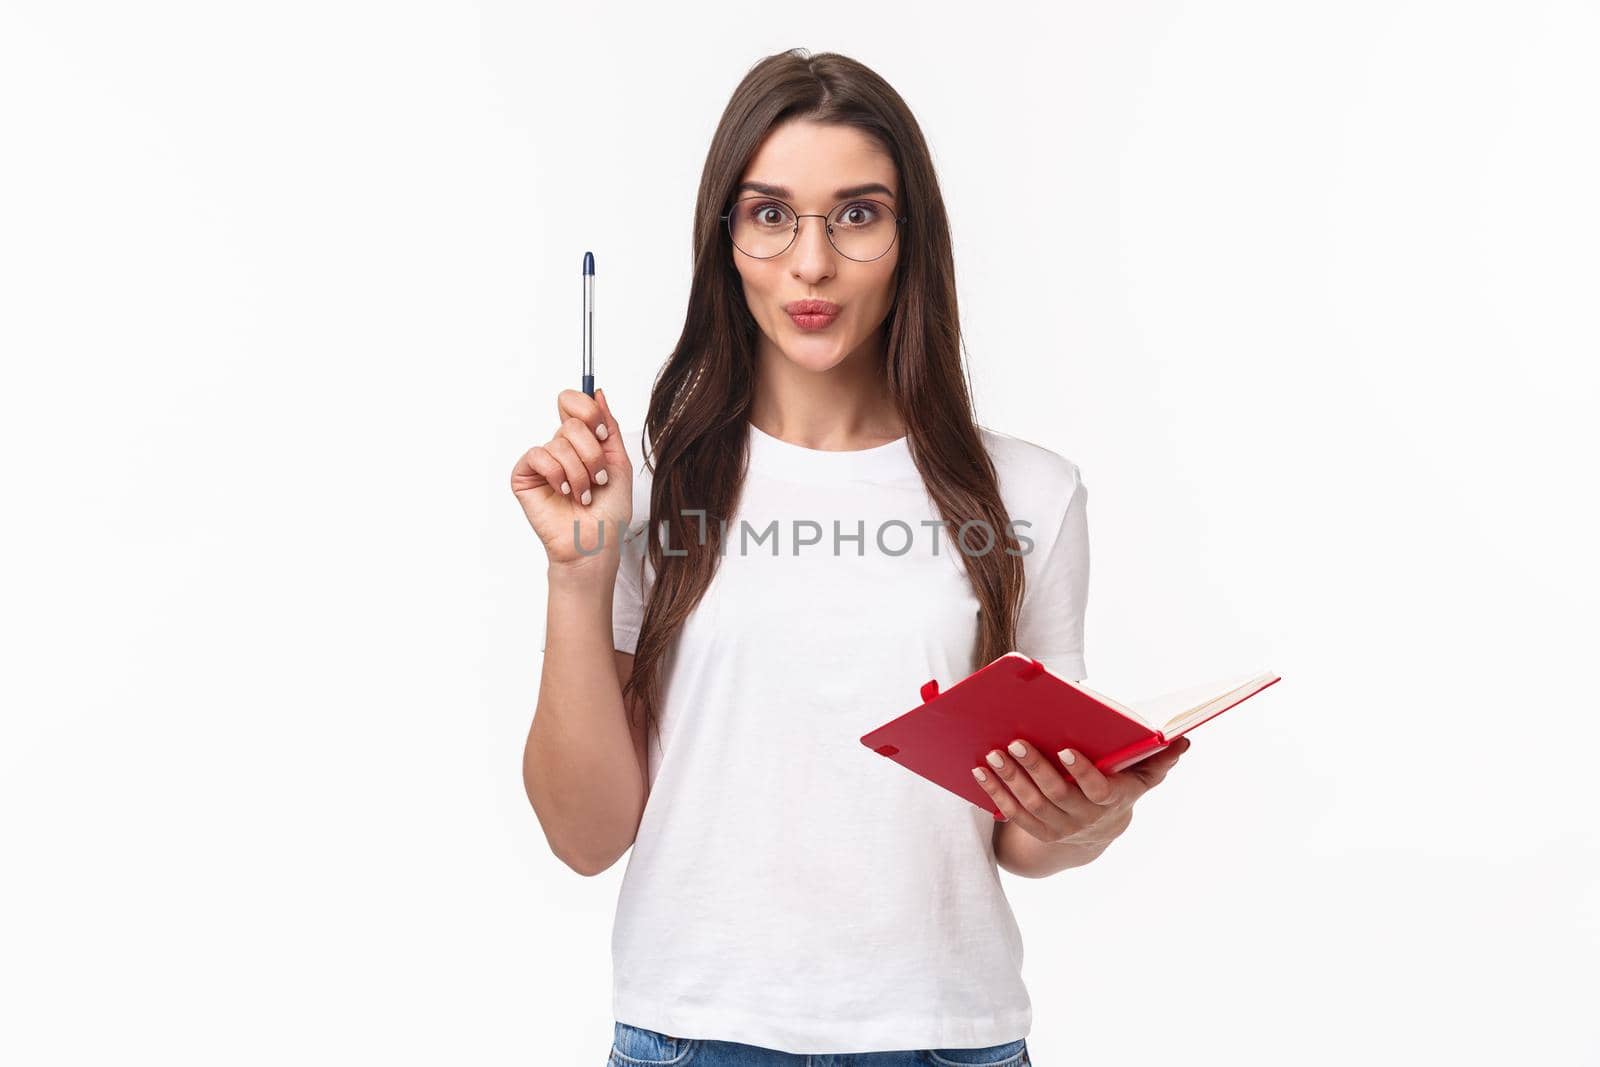 Creative enthusiastic young woman have great idea, writing it down in her notebook not to forget, raising pen in eureka sign, smiling excited, prepare plan or daily schedule, white background.